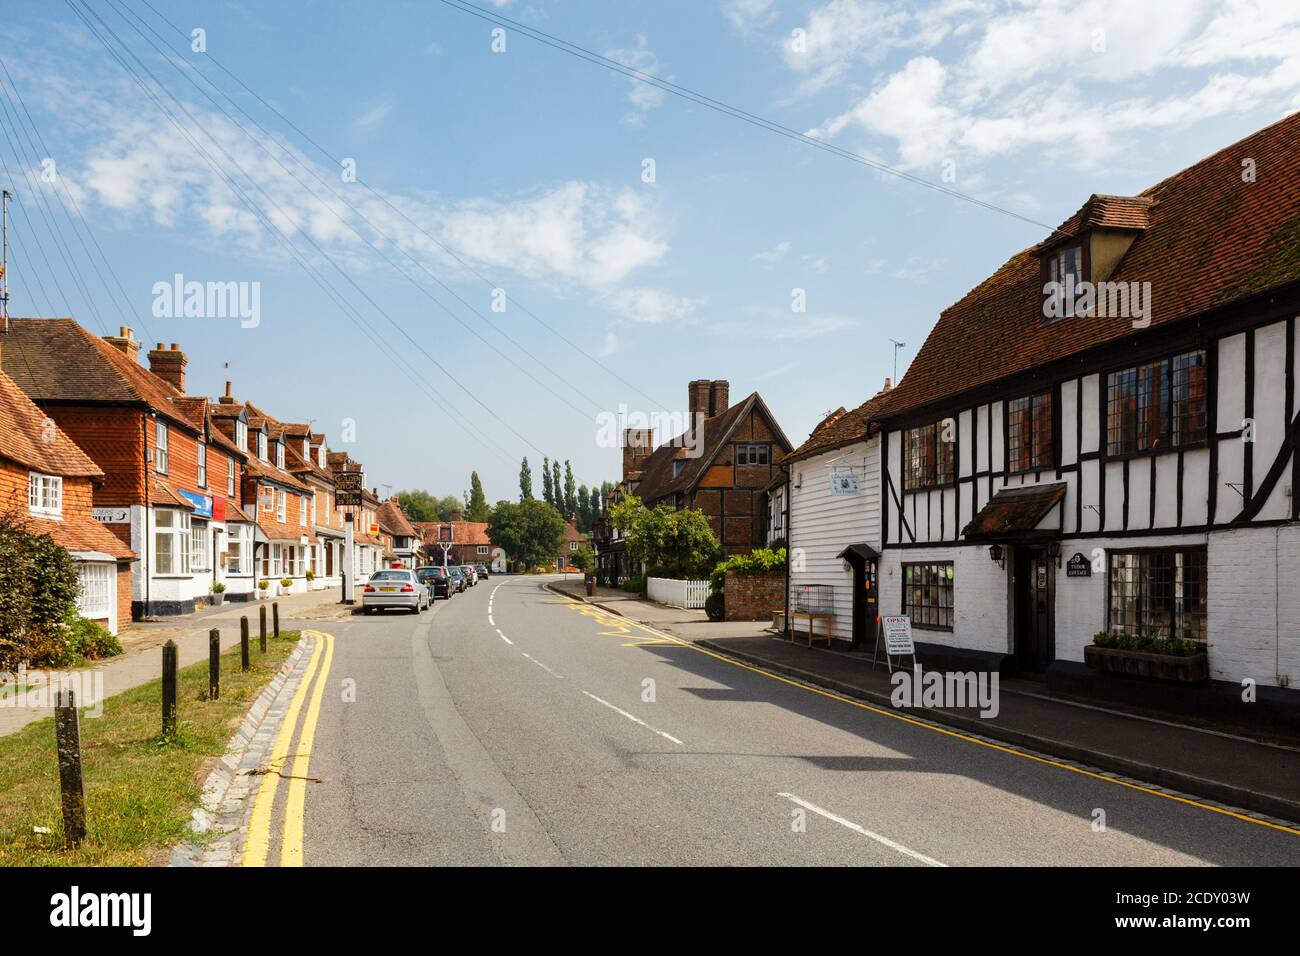 View along the main street lined with typical old Kentish buildings in Biddenden, Kent, England, UK, Britain Stock Photo